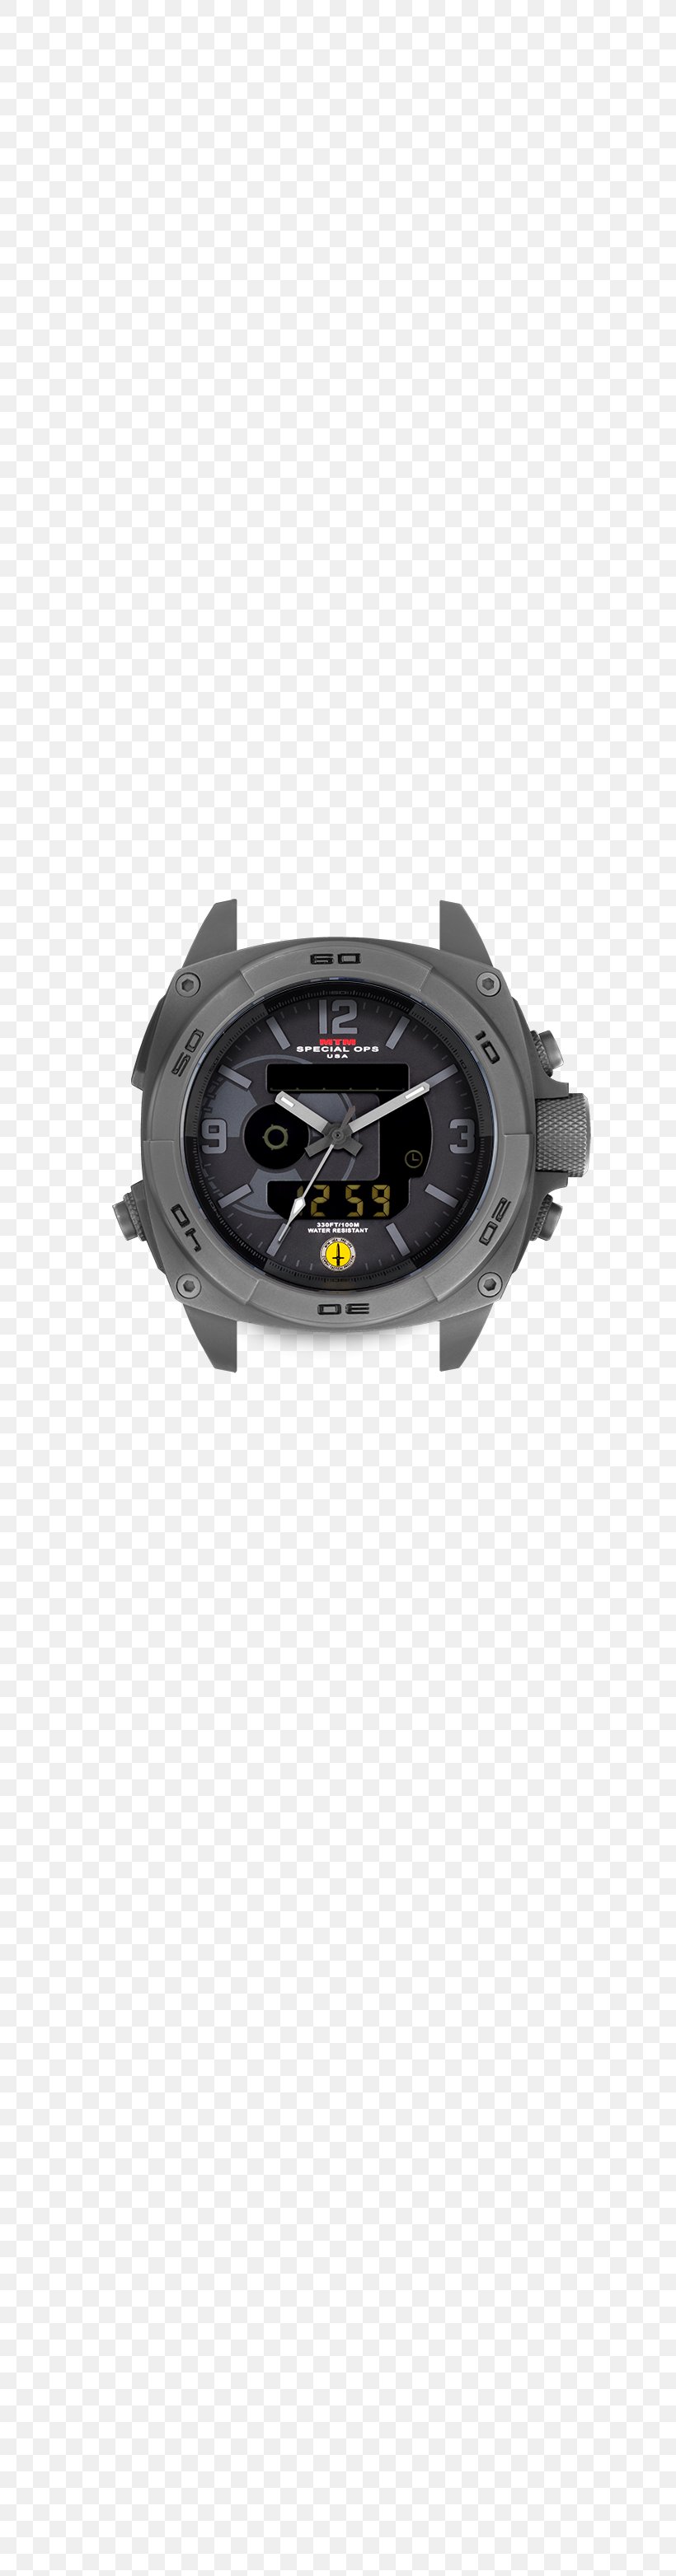 Baselworld Military Watch Rad Rolex Yacht-Master II, PNG, 700x3127px, Baselworld, Apple Watch, Chronograph, Dial, Geiger Counters Download Free